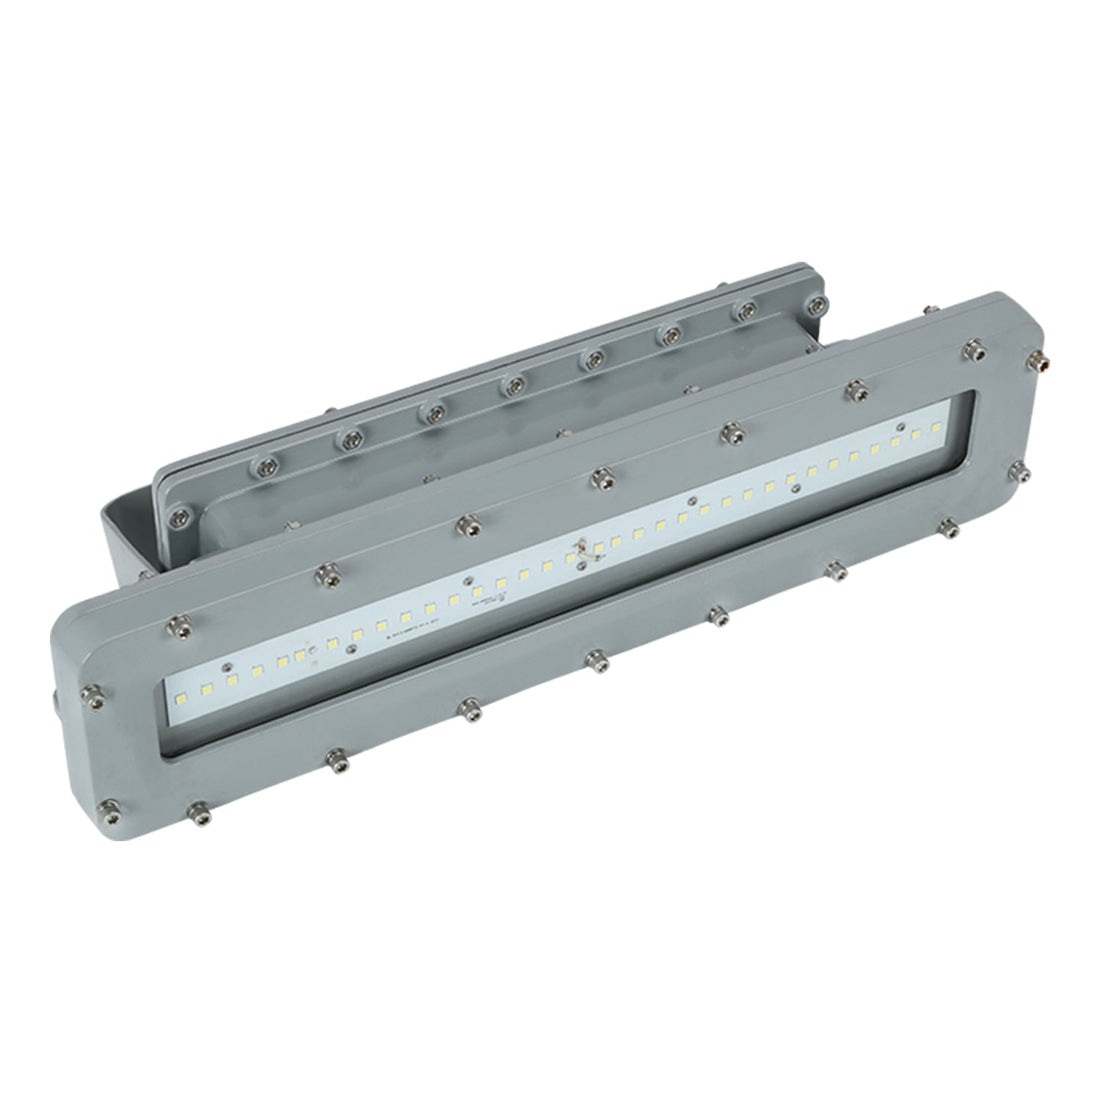 I Series 50W Dimmable LED Explosion Proof Linear Light: Compact and Powerful Lighting Solution for Hazardous Locations with 5400LM and IP66 Protection, Ideal for Industrial Environments